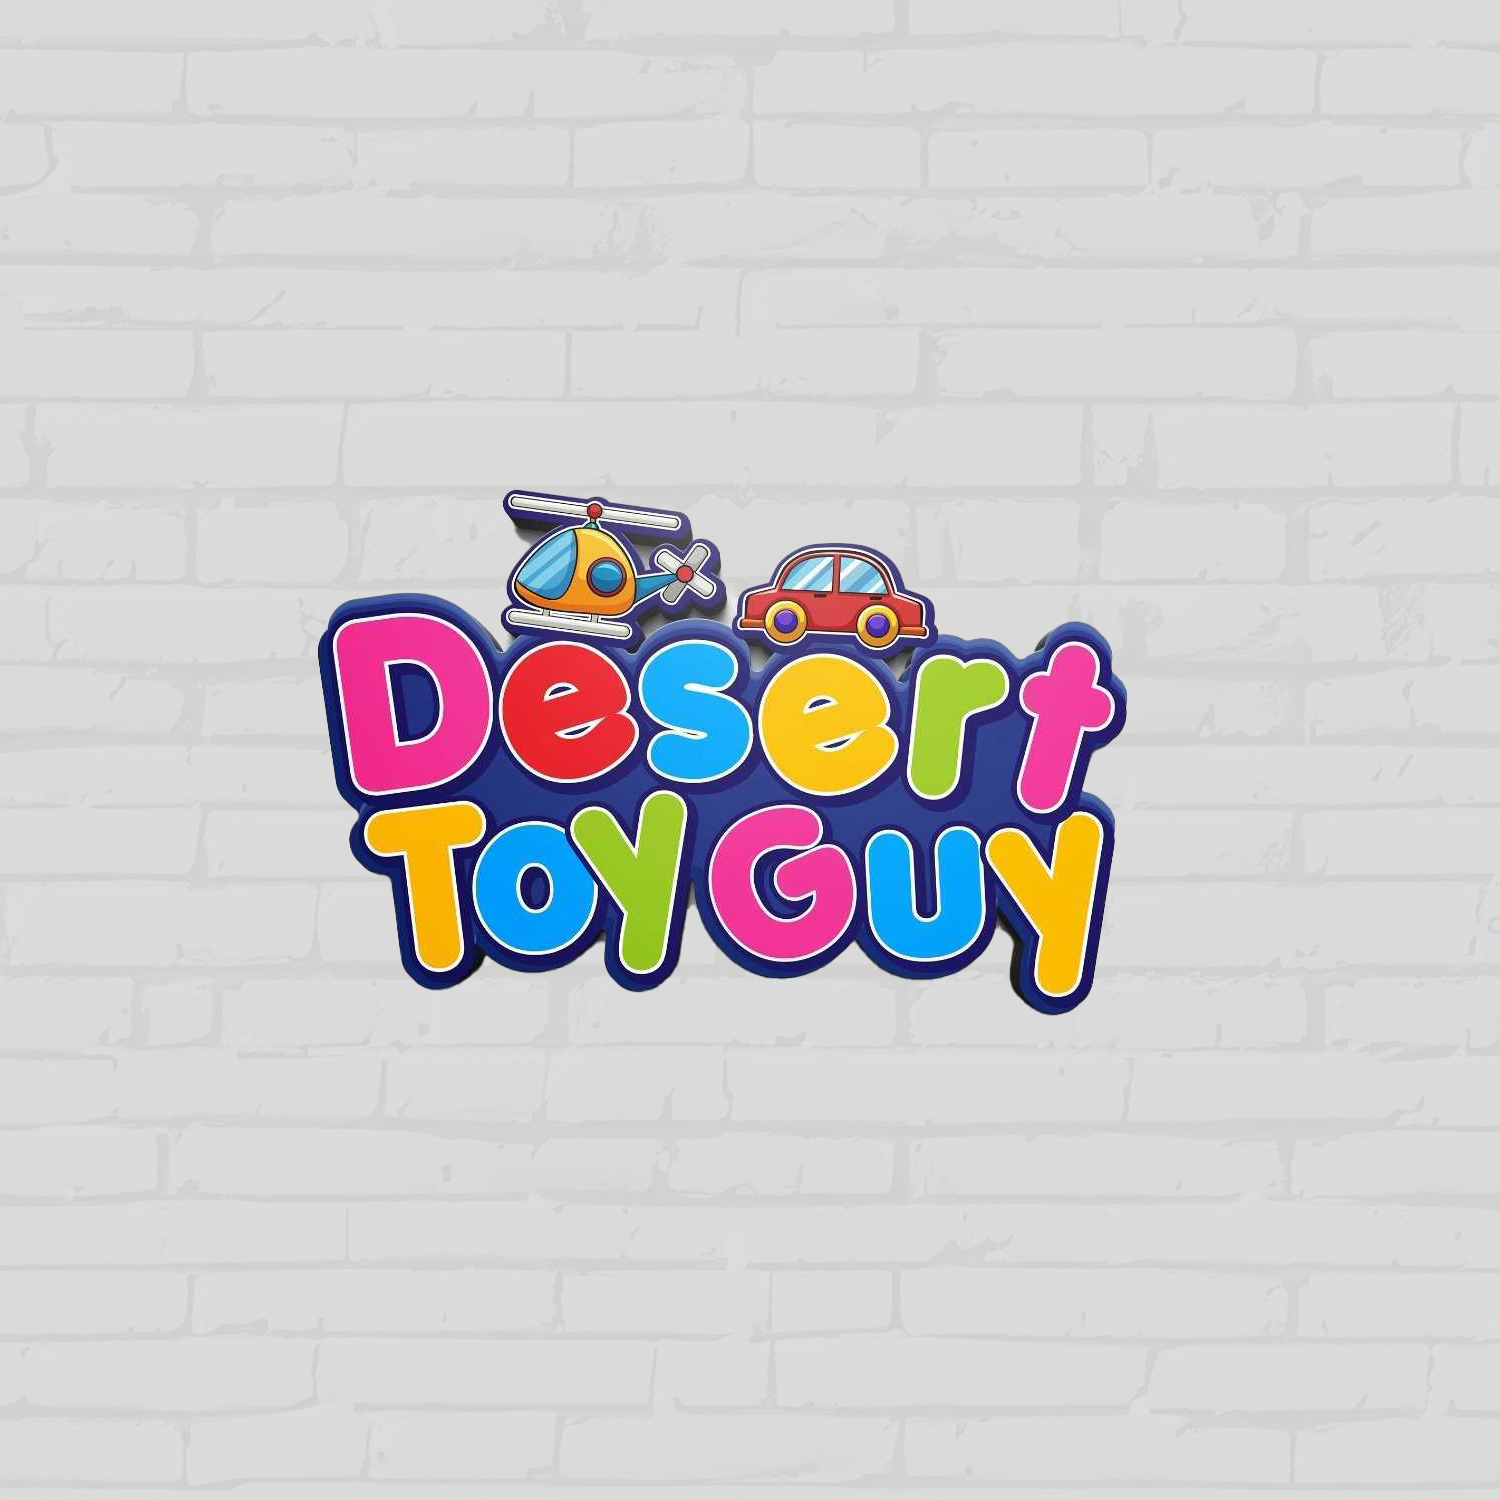 A photo of the Desert Toy Guy logo 